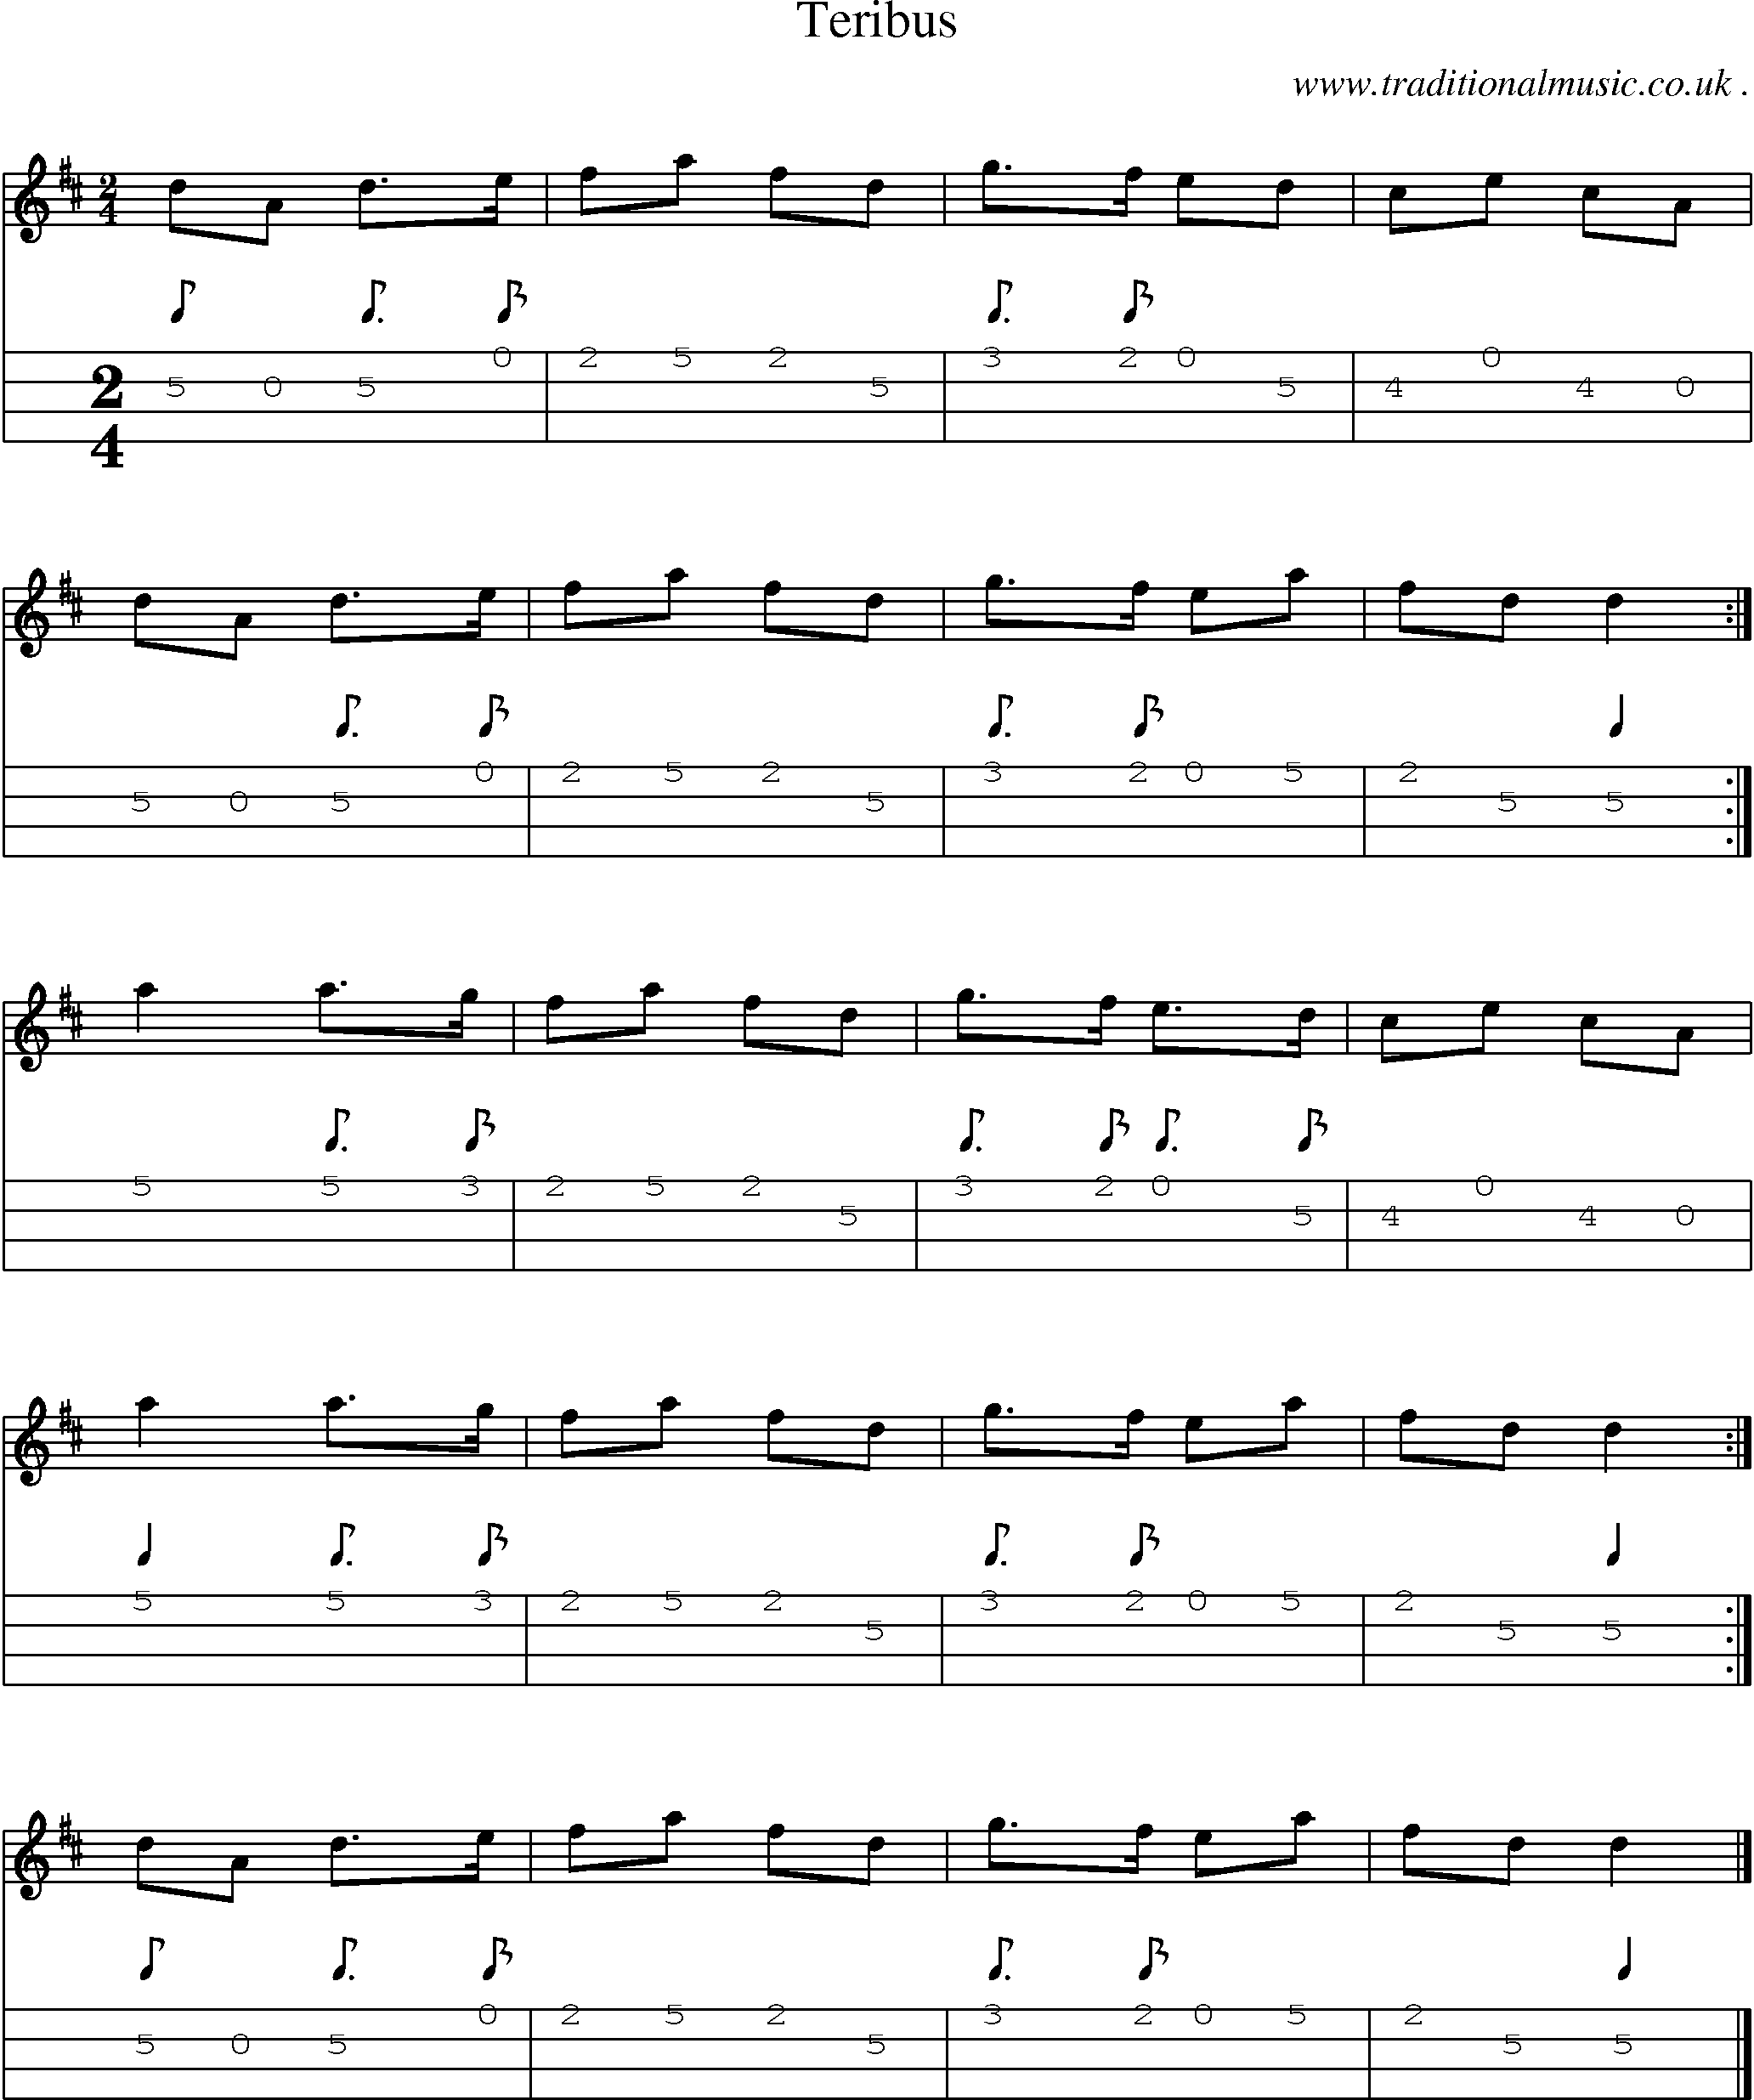 Sheet-music  score, Chords and Mandolin Tabs for Teribus